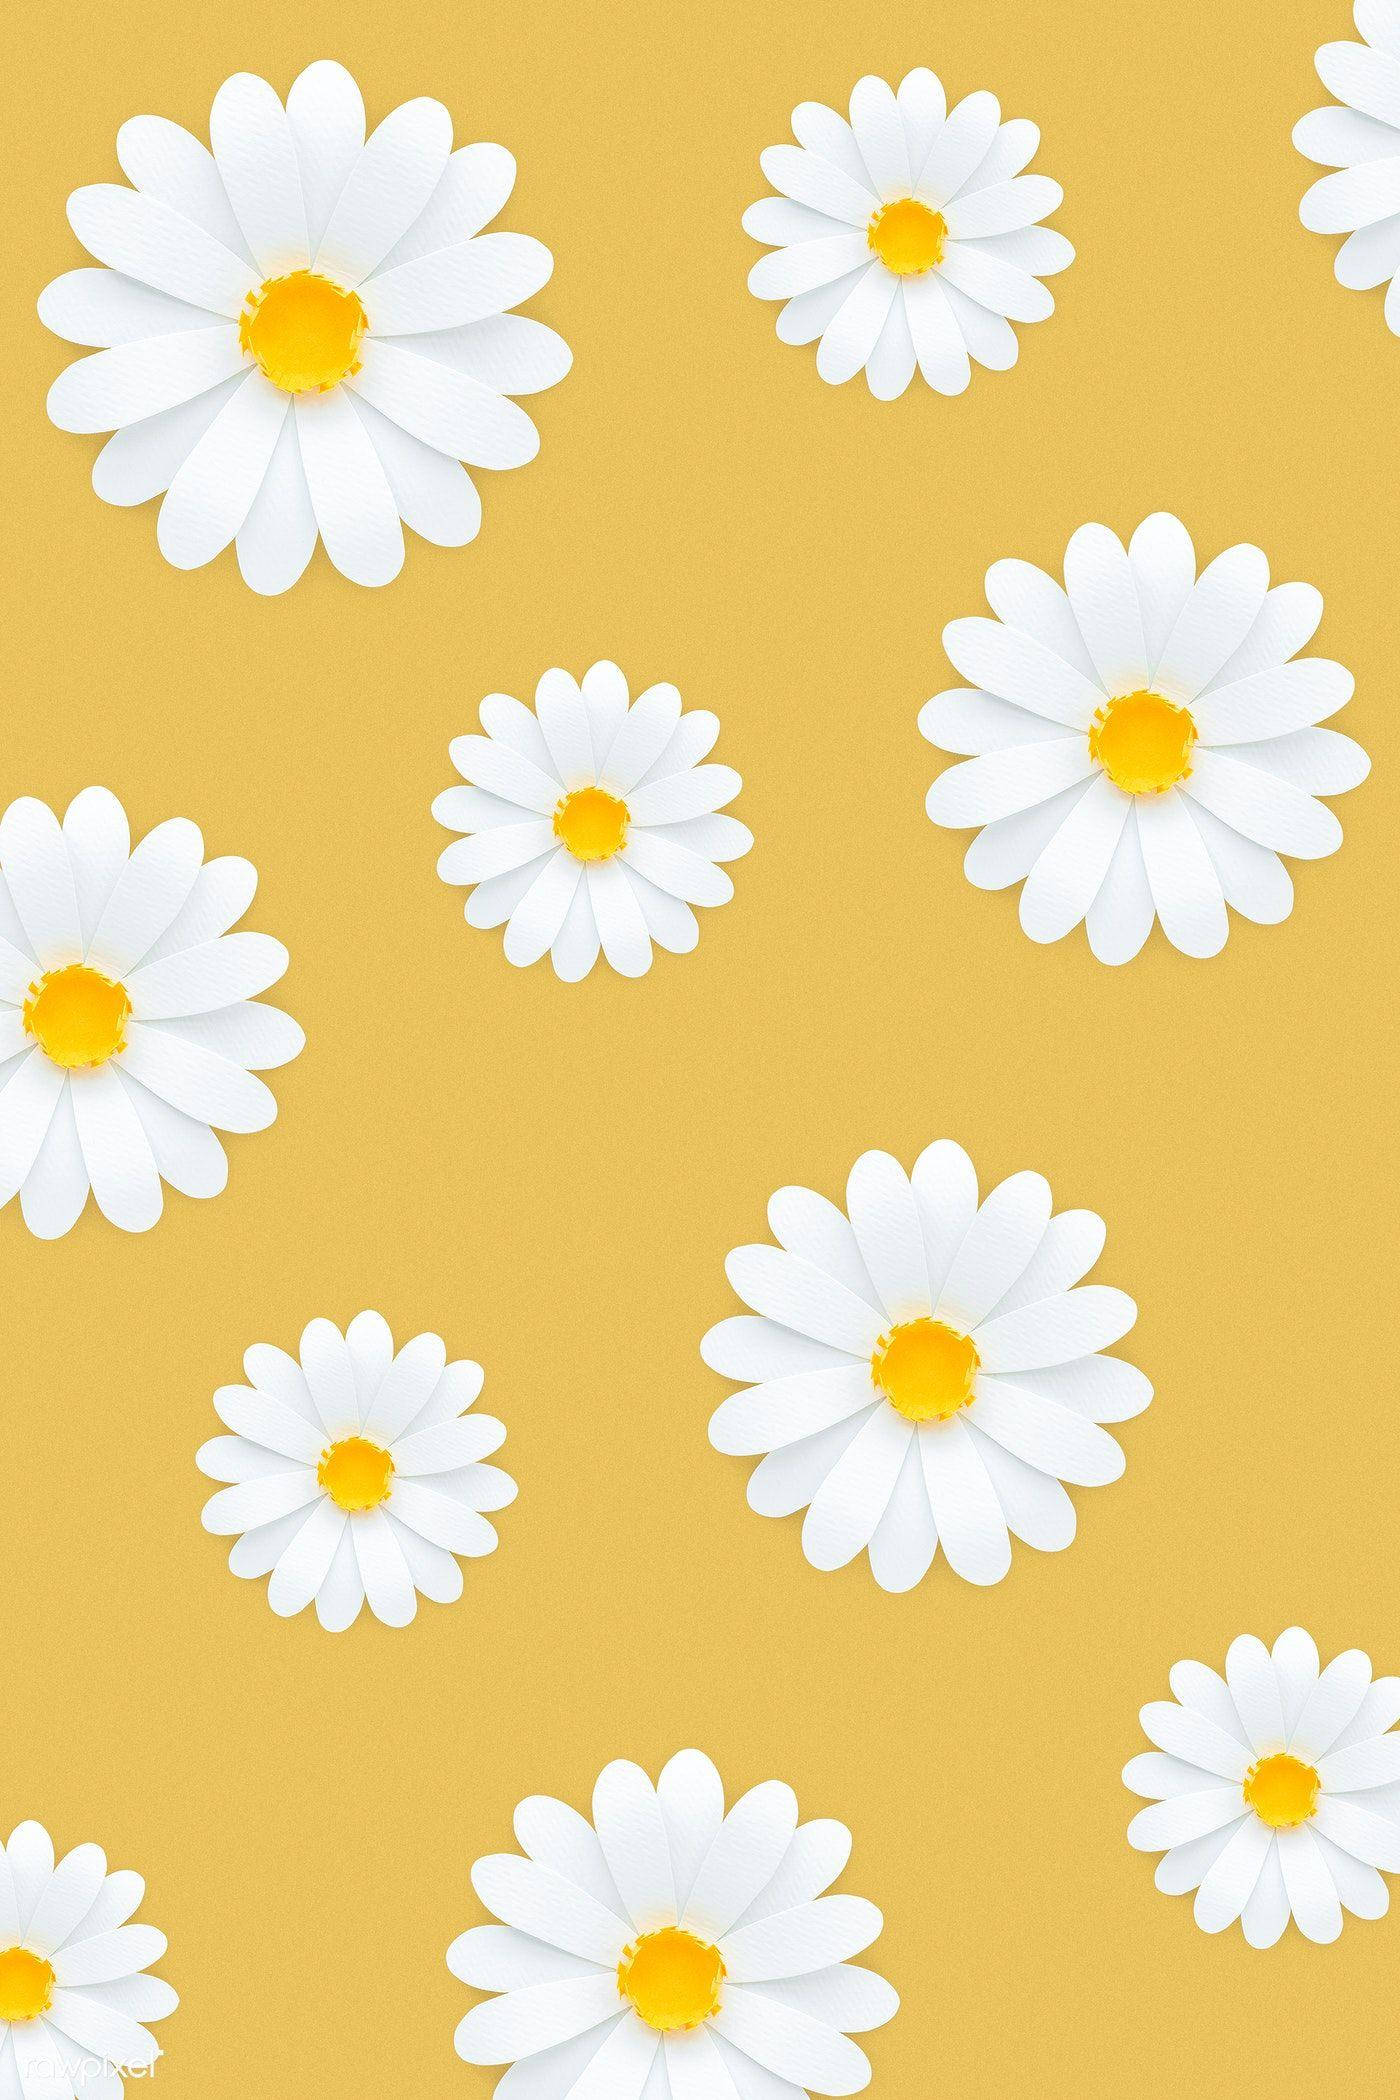 Download White Daisy Aesthetic In Yellow Wallpaper